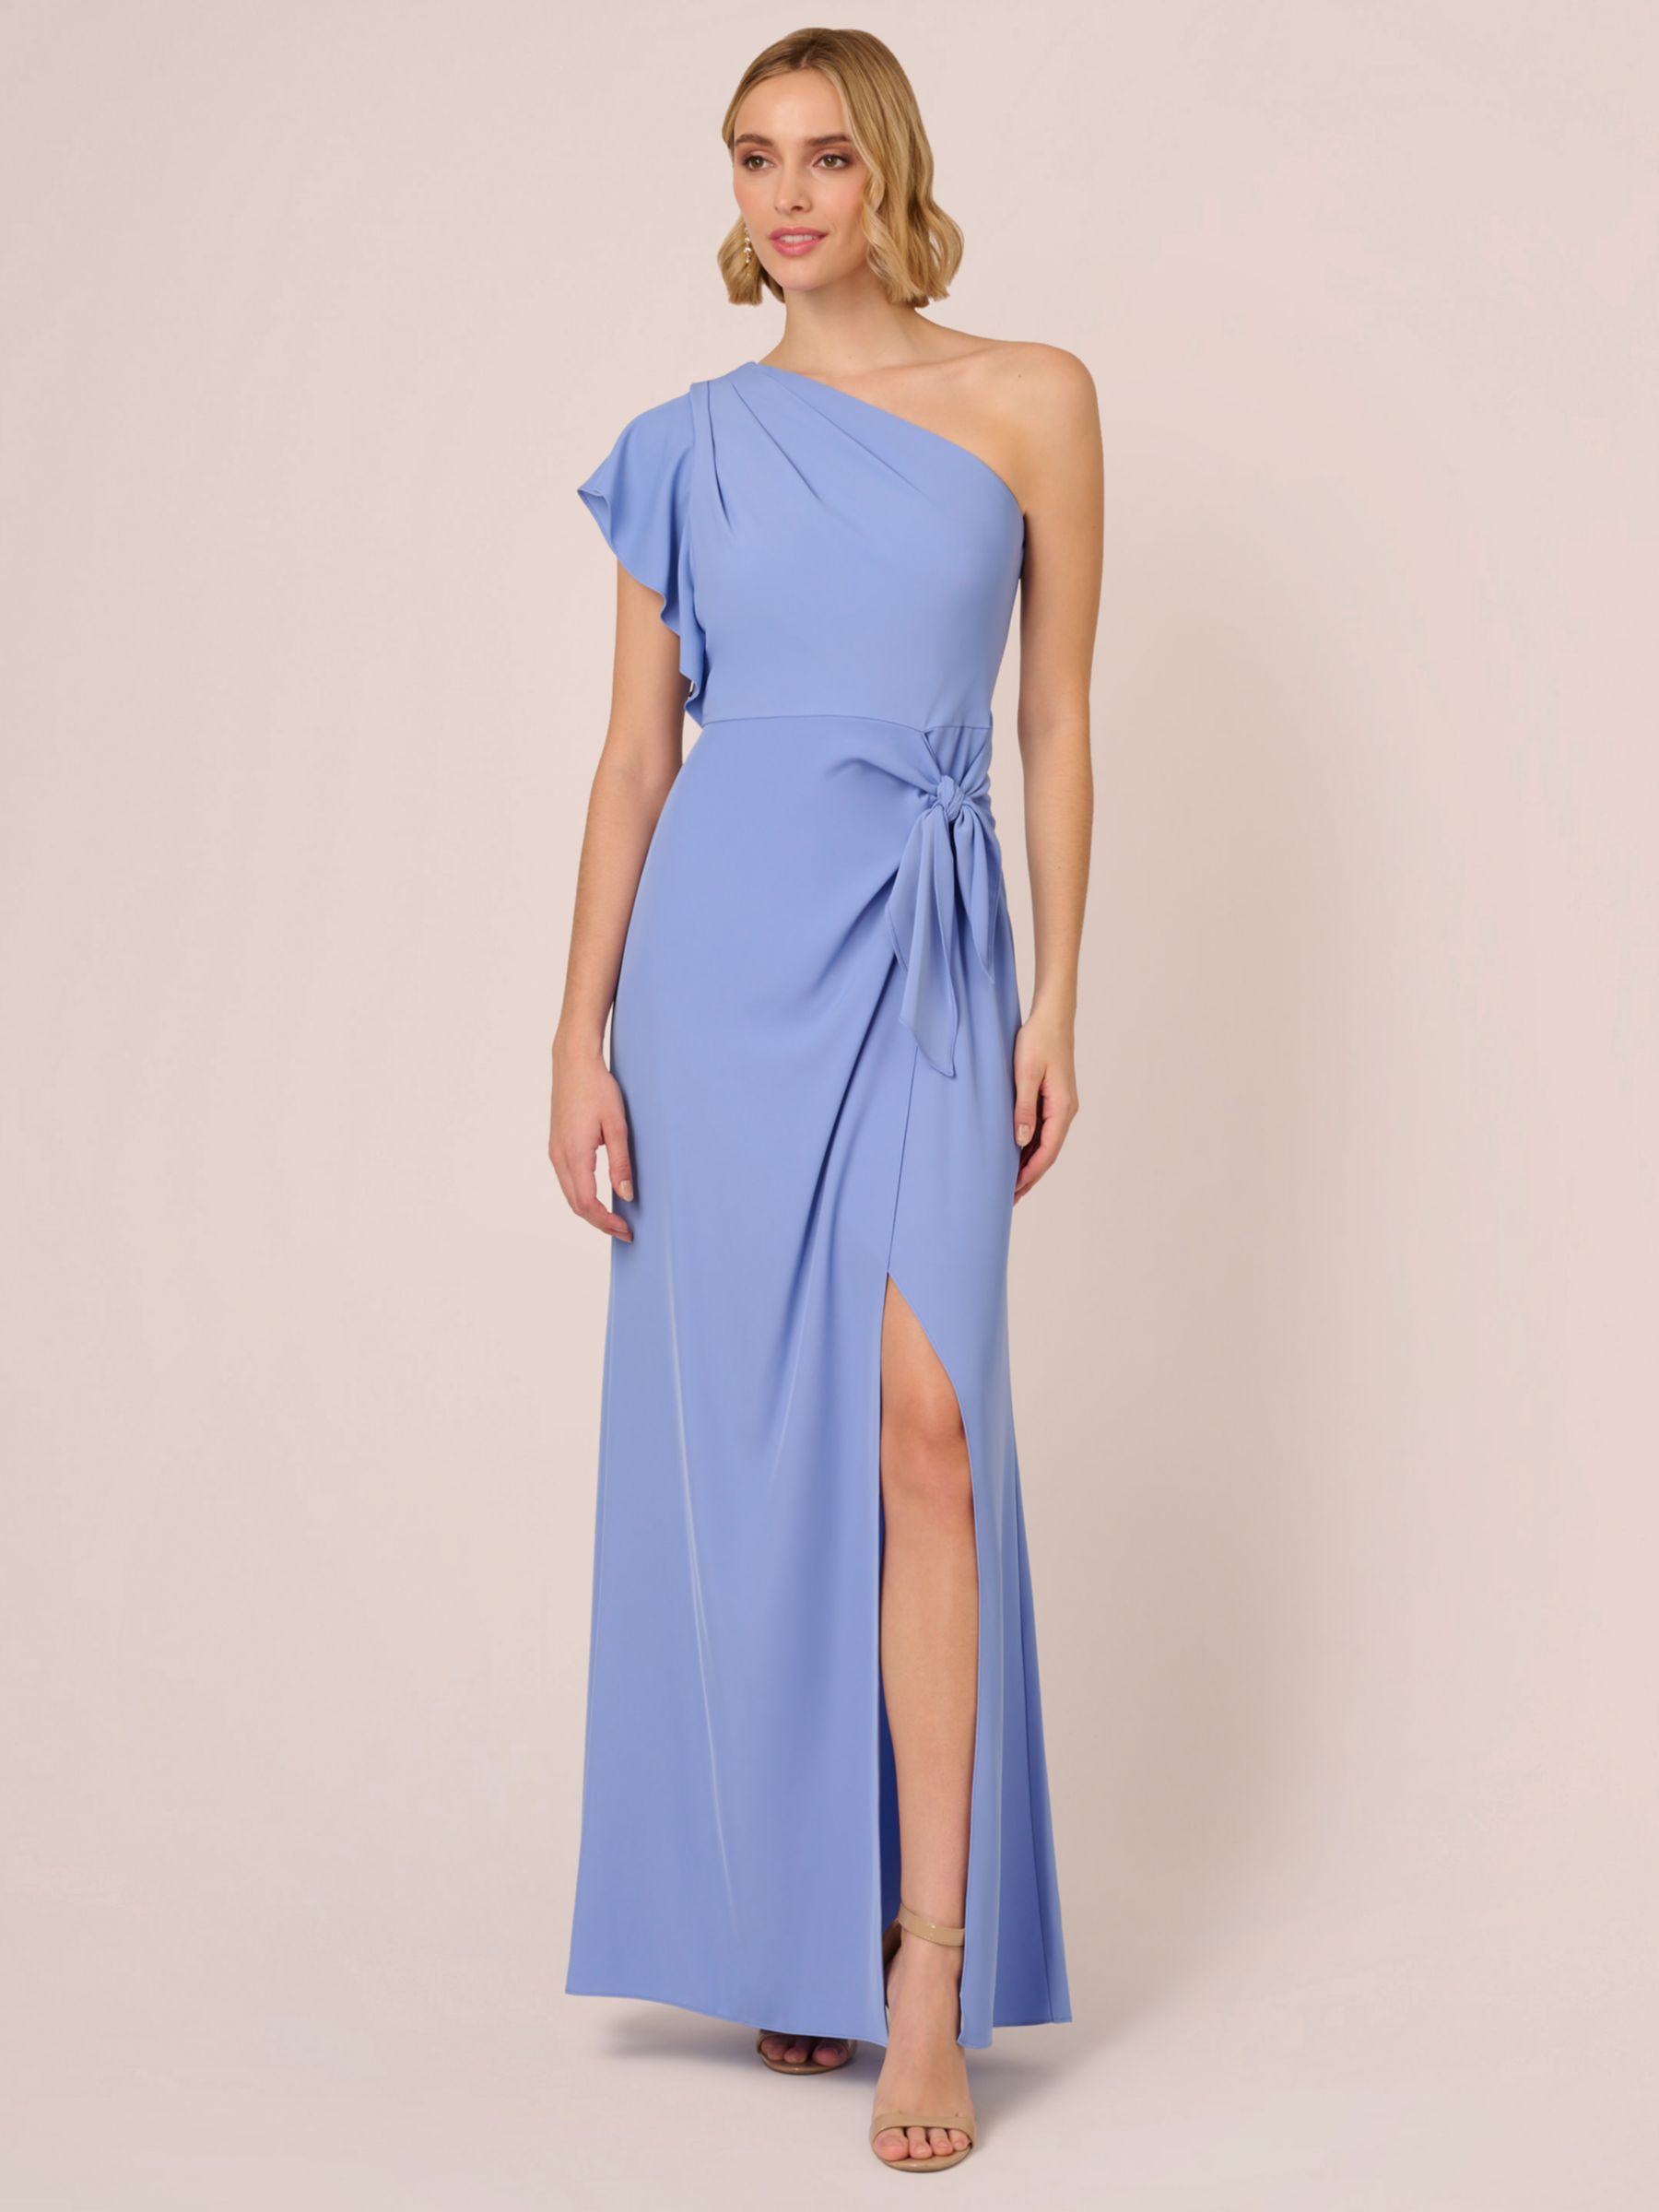 Adrianna Papell One Shoulder Maxi Dress, Peri Cruise, 6